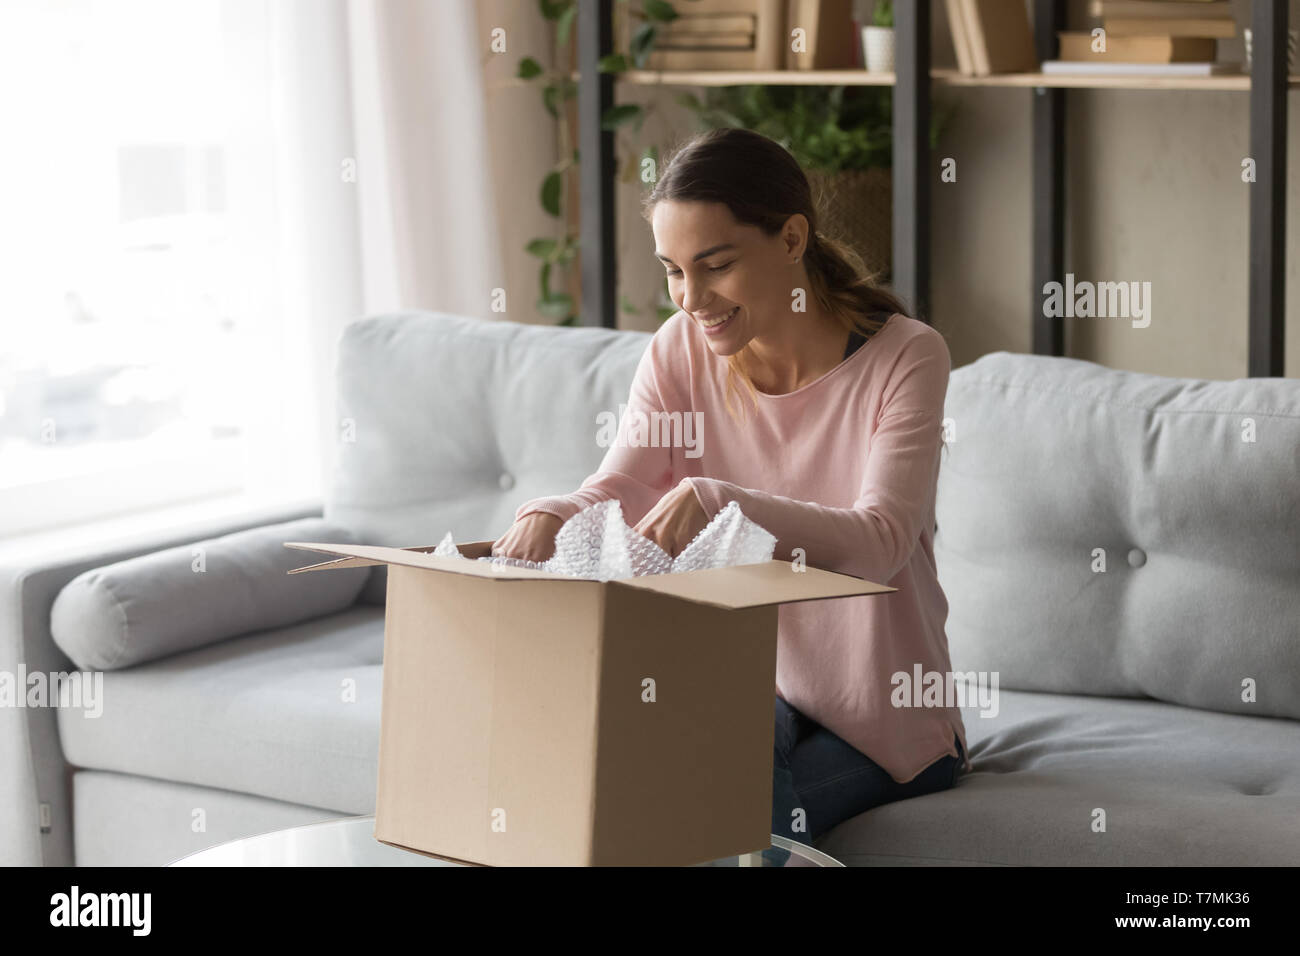 Client woman sitting on couch unbox carton box feels satisfied Stock Photo